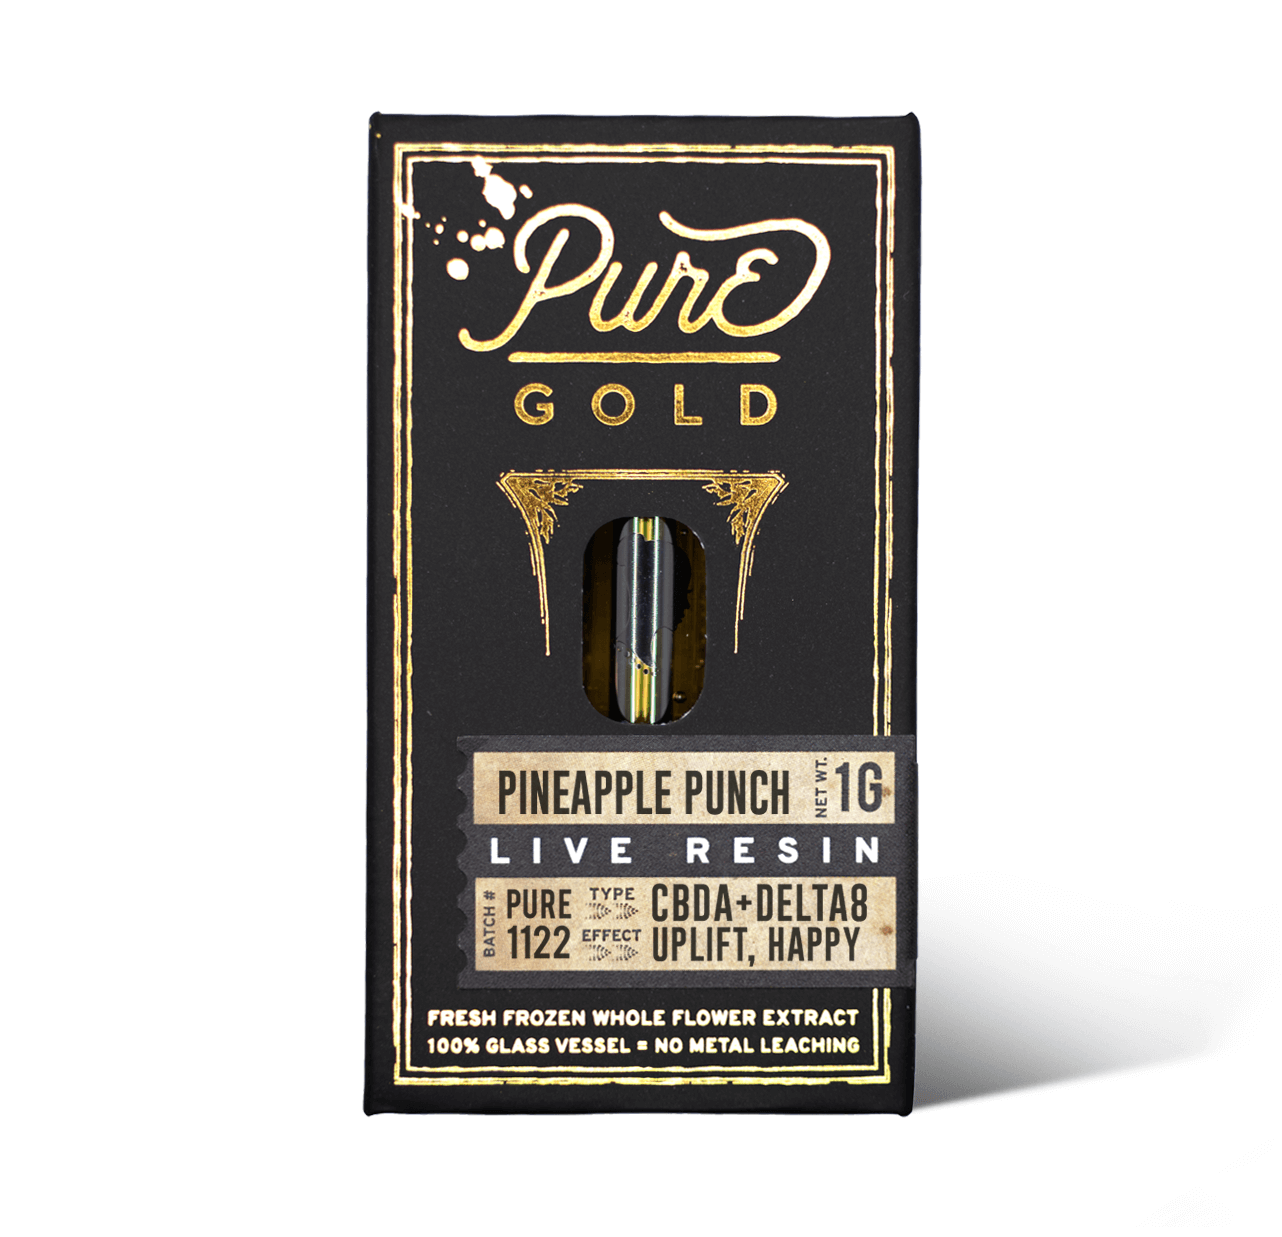 Primary Jane Pure Gold Live Resin | Pineapple Punch